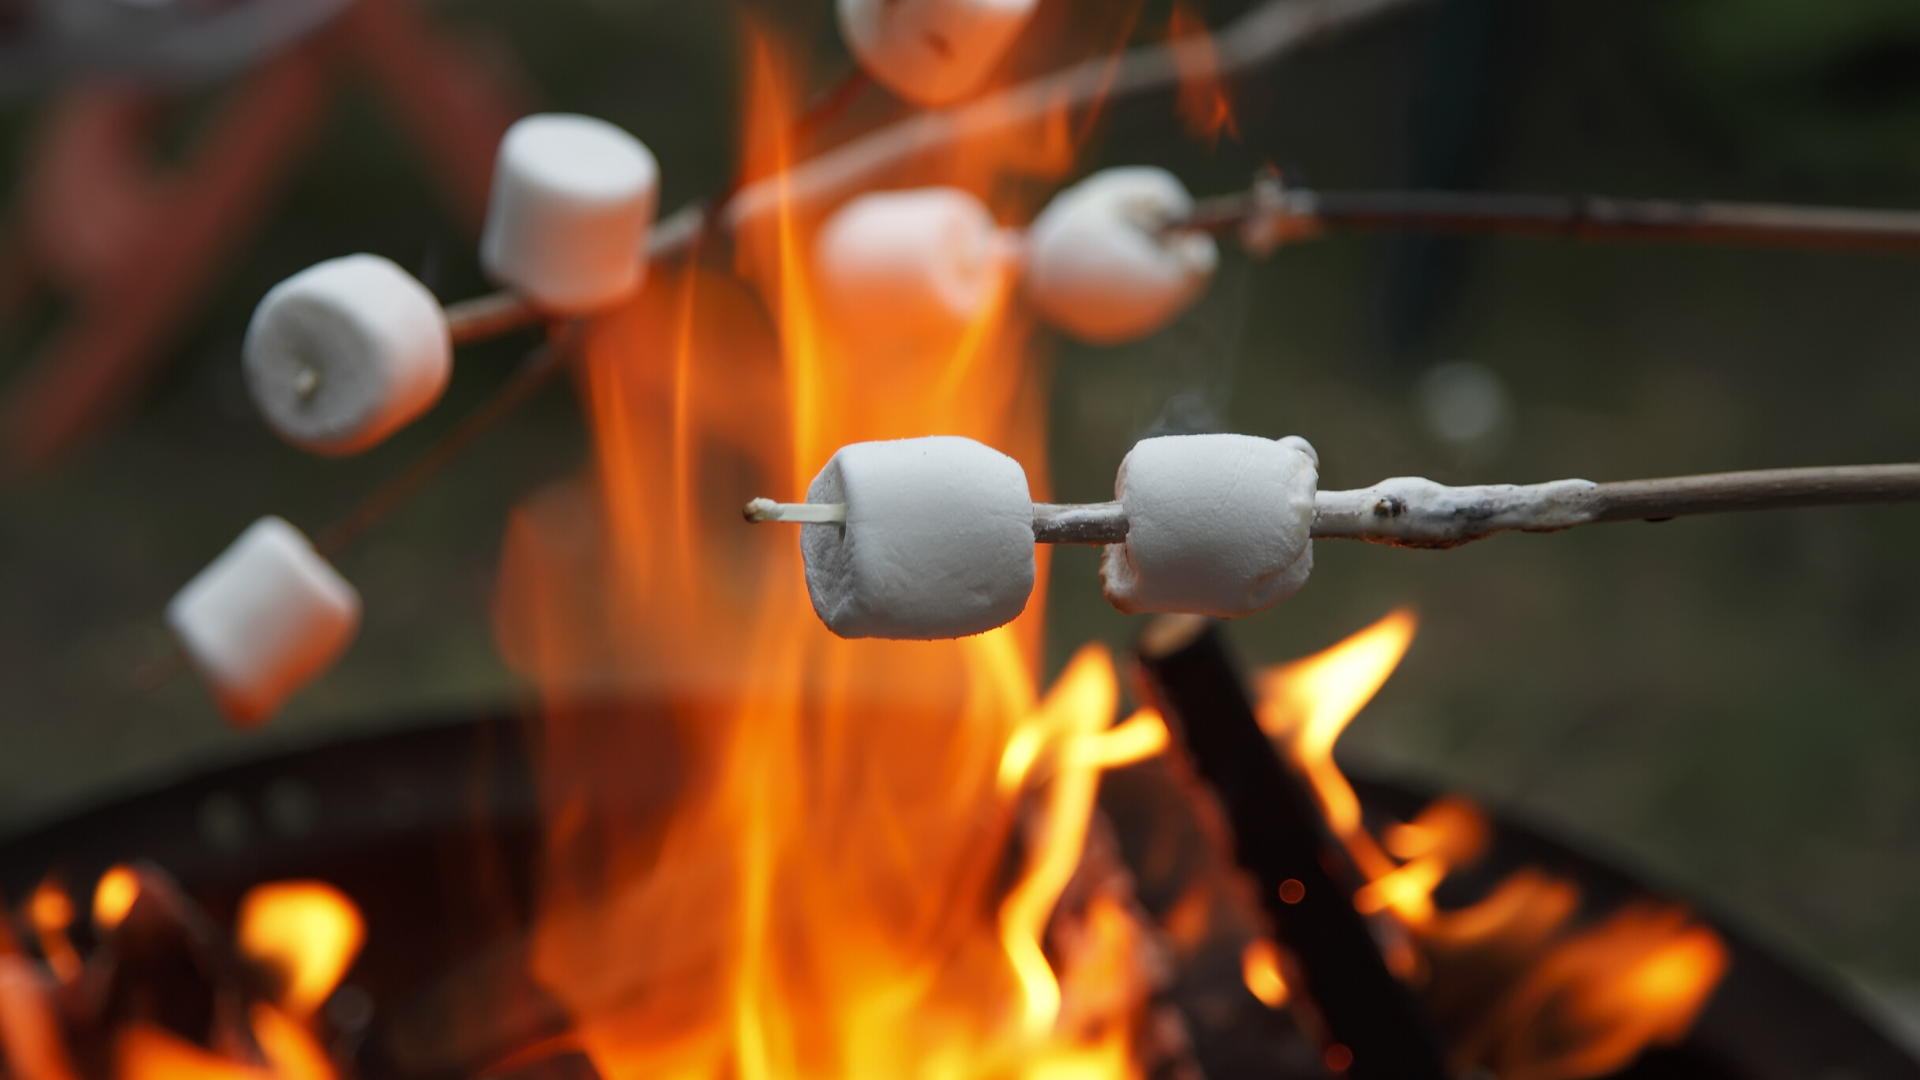 Campfires are Good for Our Health? Break Out the Marshmallows!